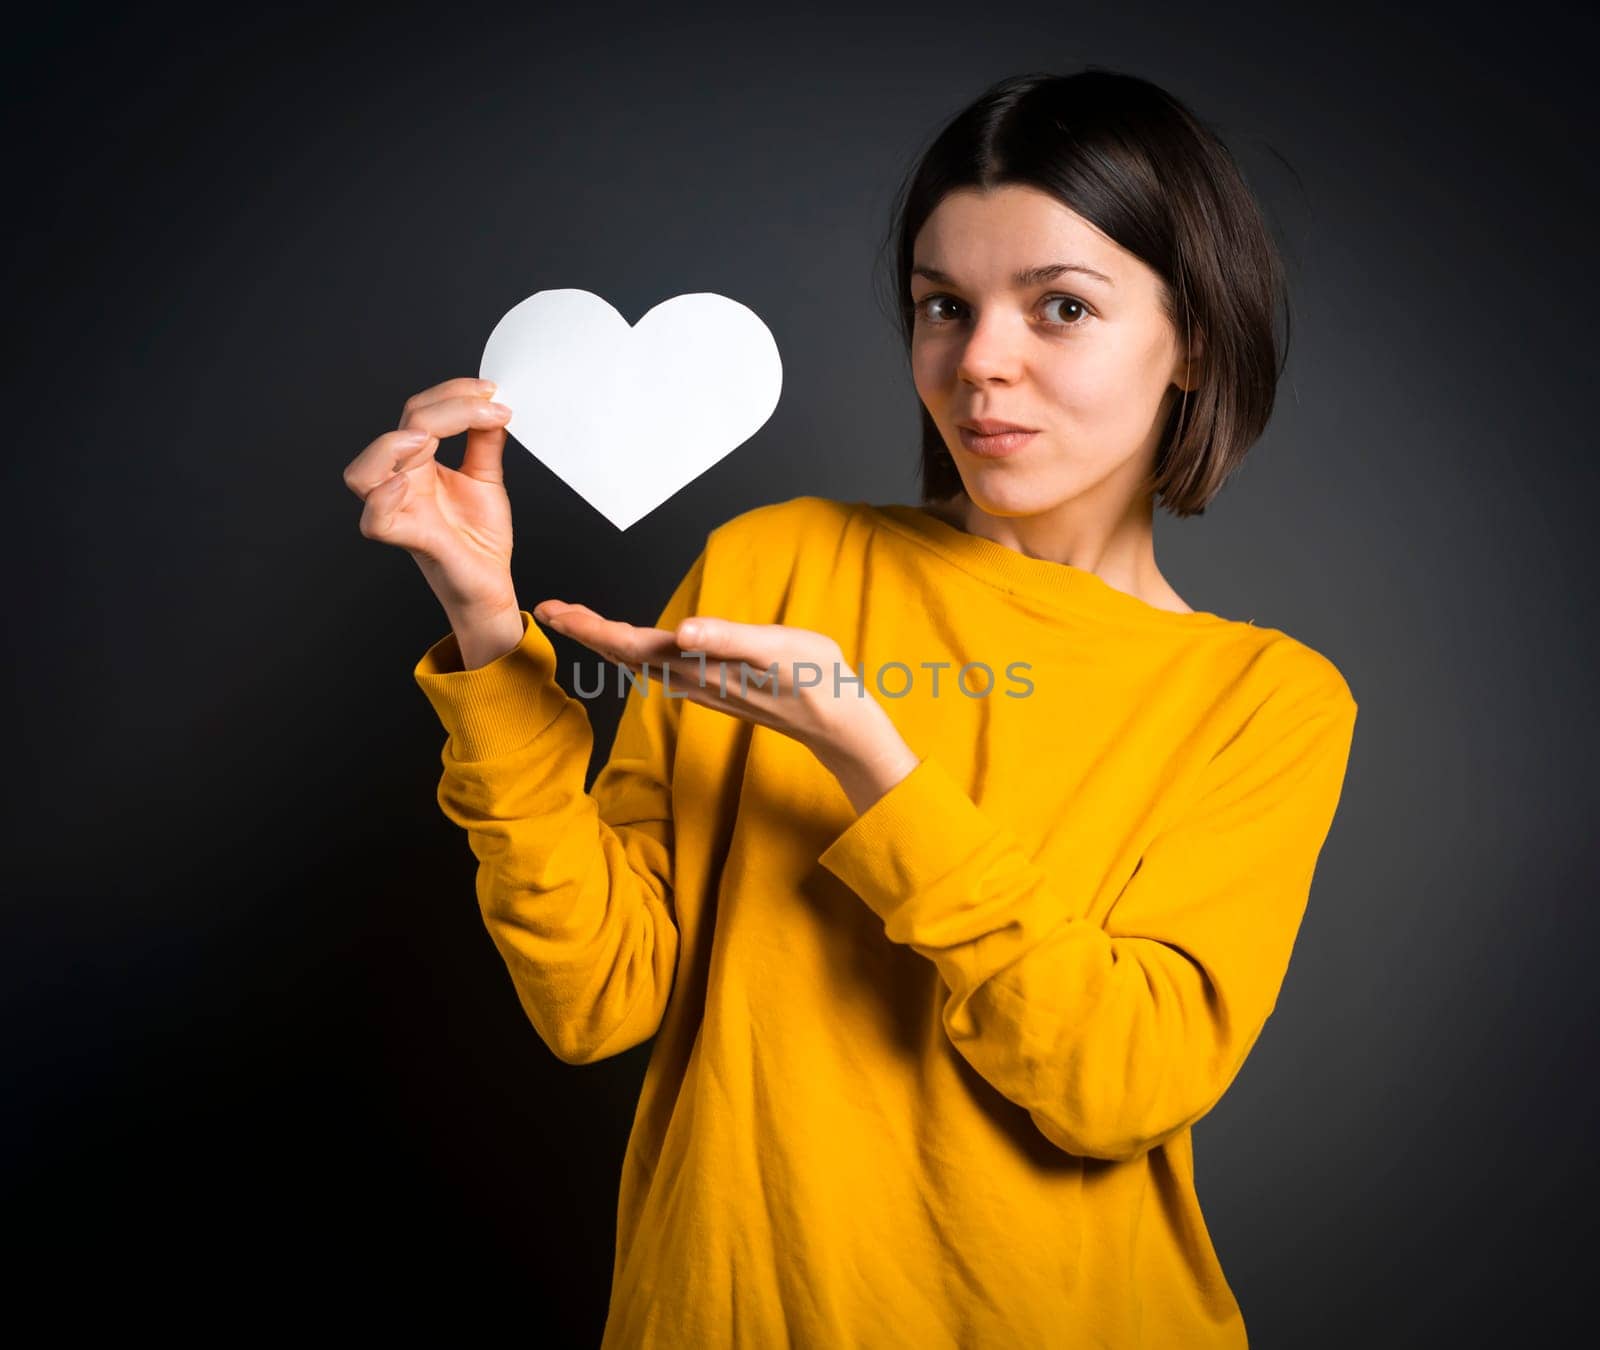 A young girl holds a white paper heart - a postcard or shows feelings of love. A woman with a joyful surprised face before the holiday and in search of love, relationships or shares her impressions.